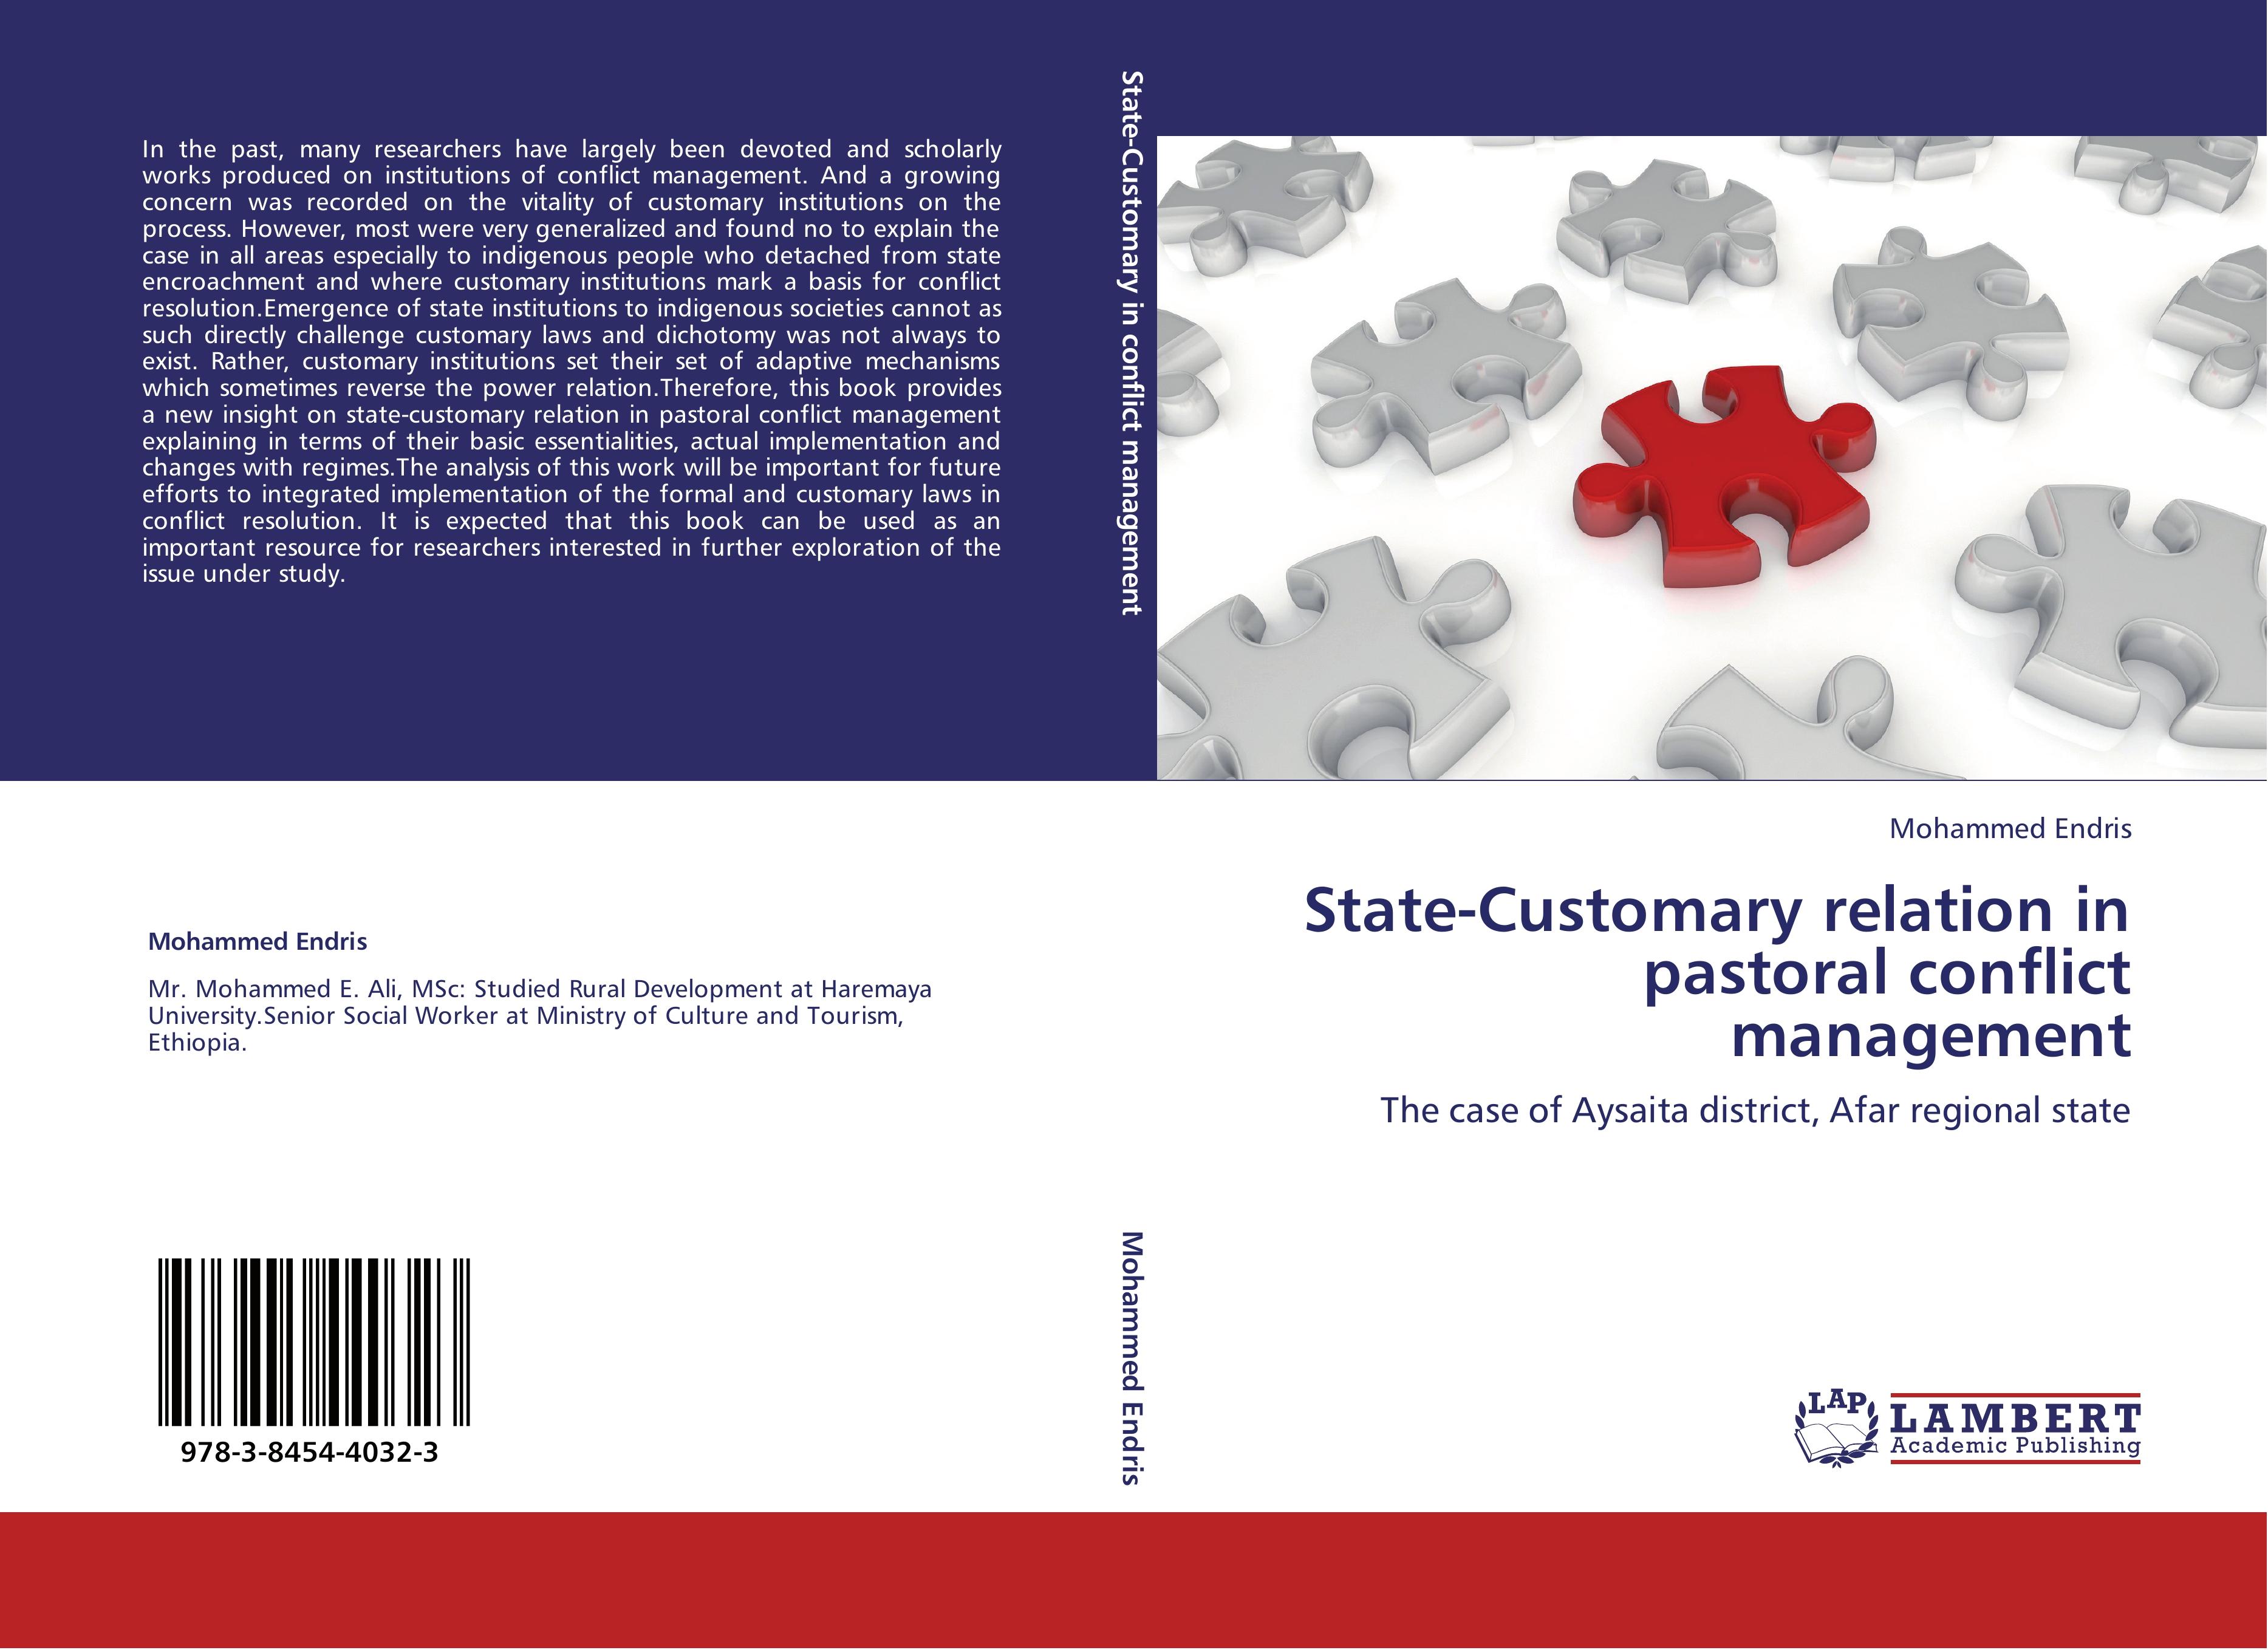 State-Customary relation in pastoral conflict management - Mohammed Endris